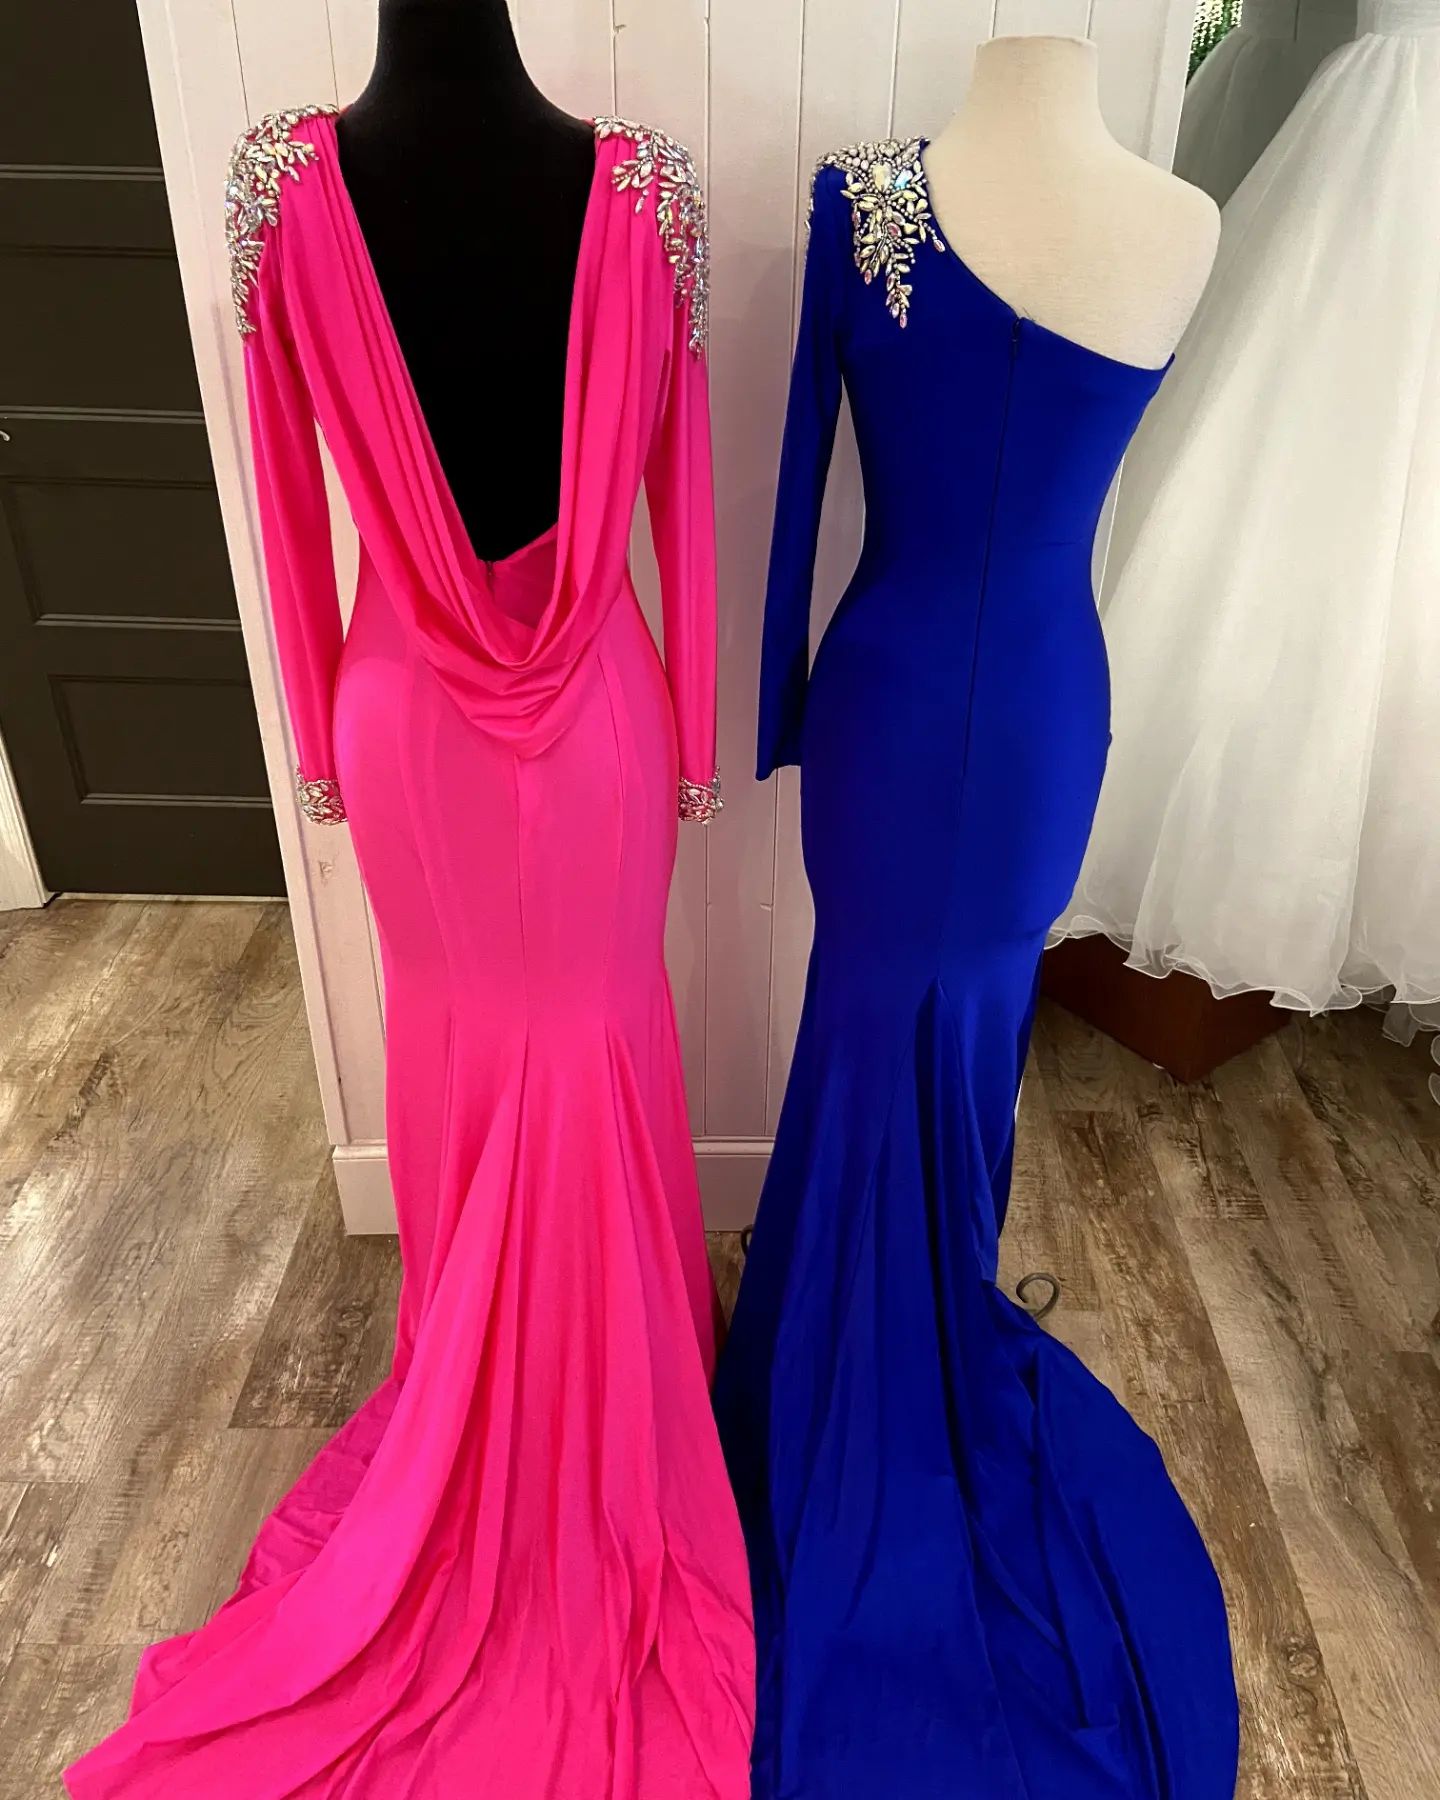 Hot Pink Prom Dress 2k23 AB Stones Long Sleeve Stretch Lycra Side Leg Slit Sweep Train Met Gala Pageant Gown Cowl Back Evening Wedding Party Hoco Royal Blue One-Shoulder